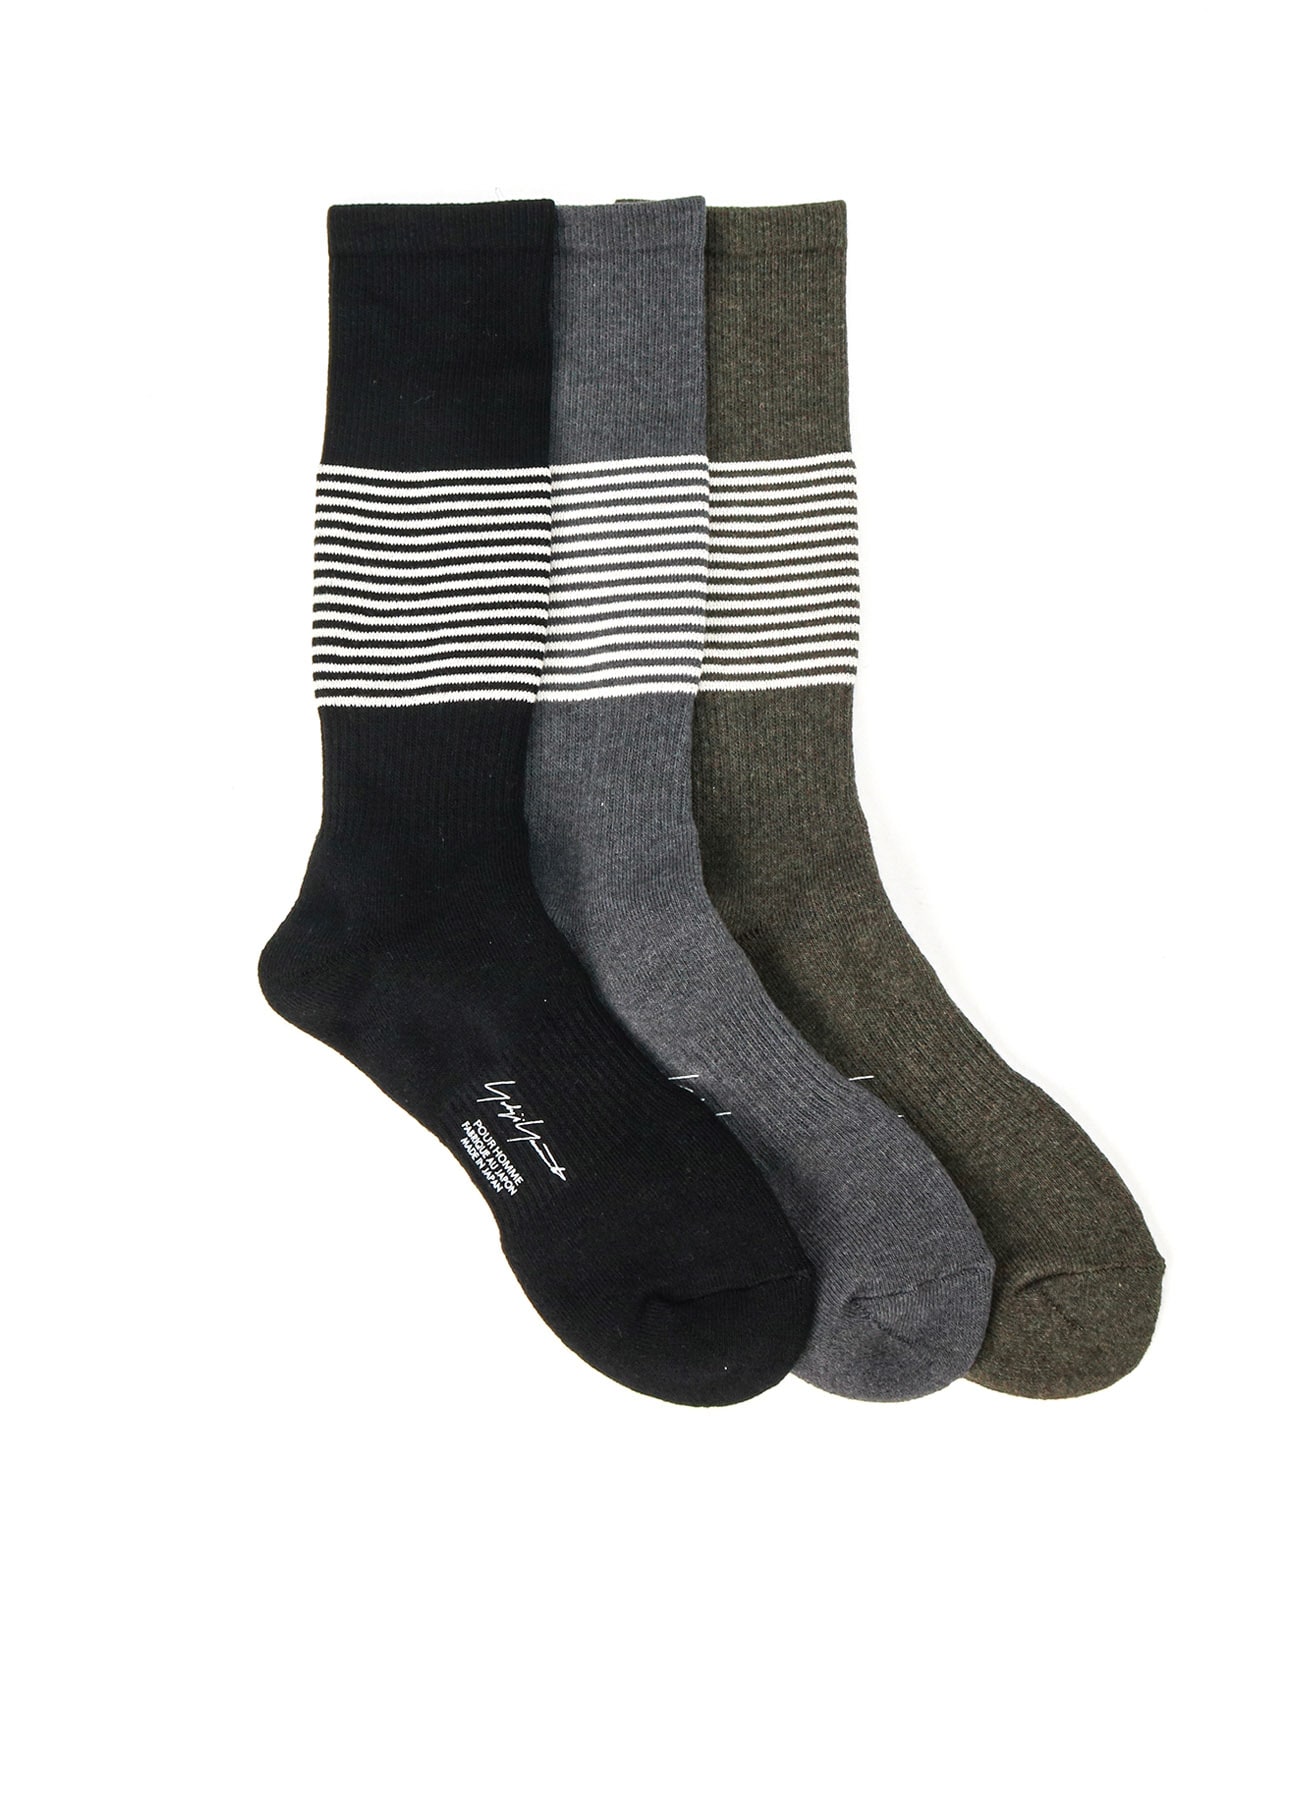 【7/6 10:00 Release】YARN DYED PILE STRIPES BOOTS SOCKS